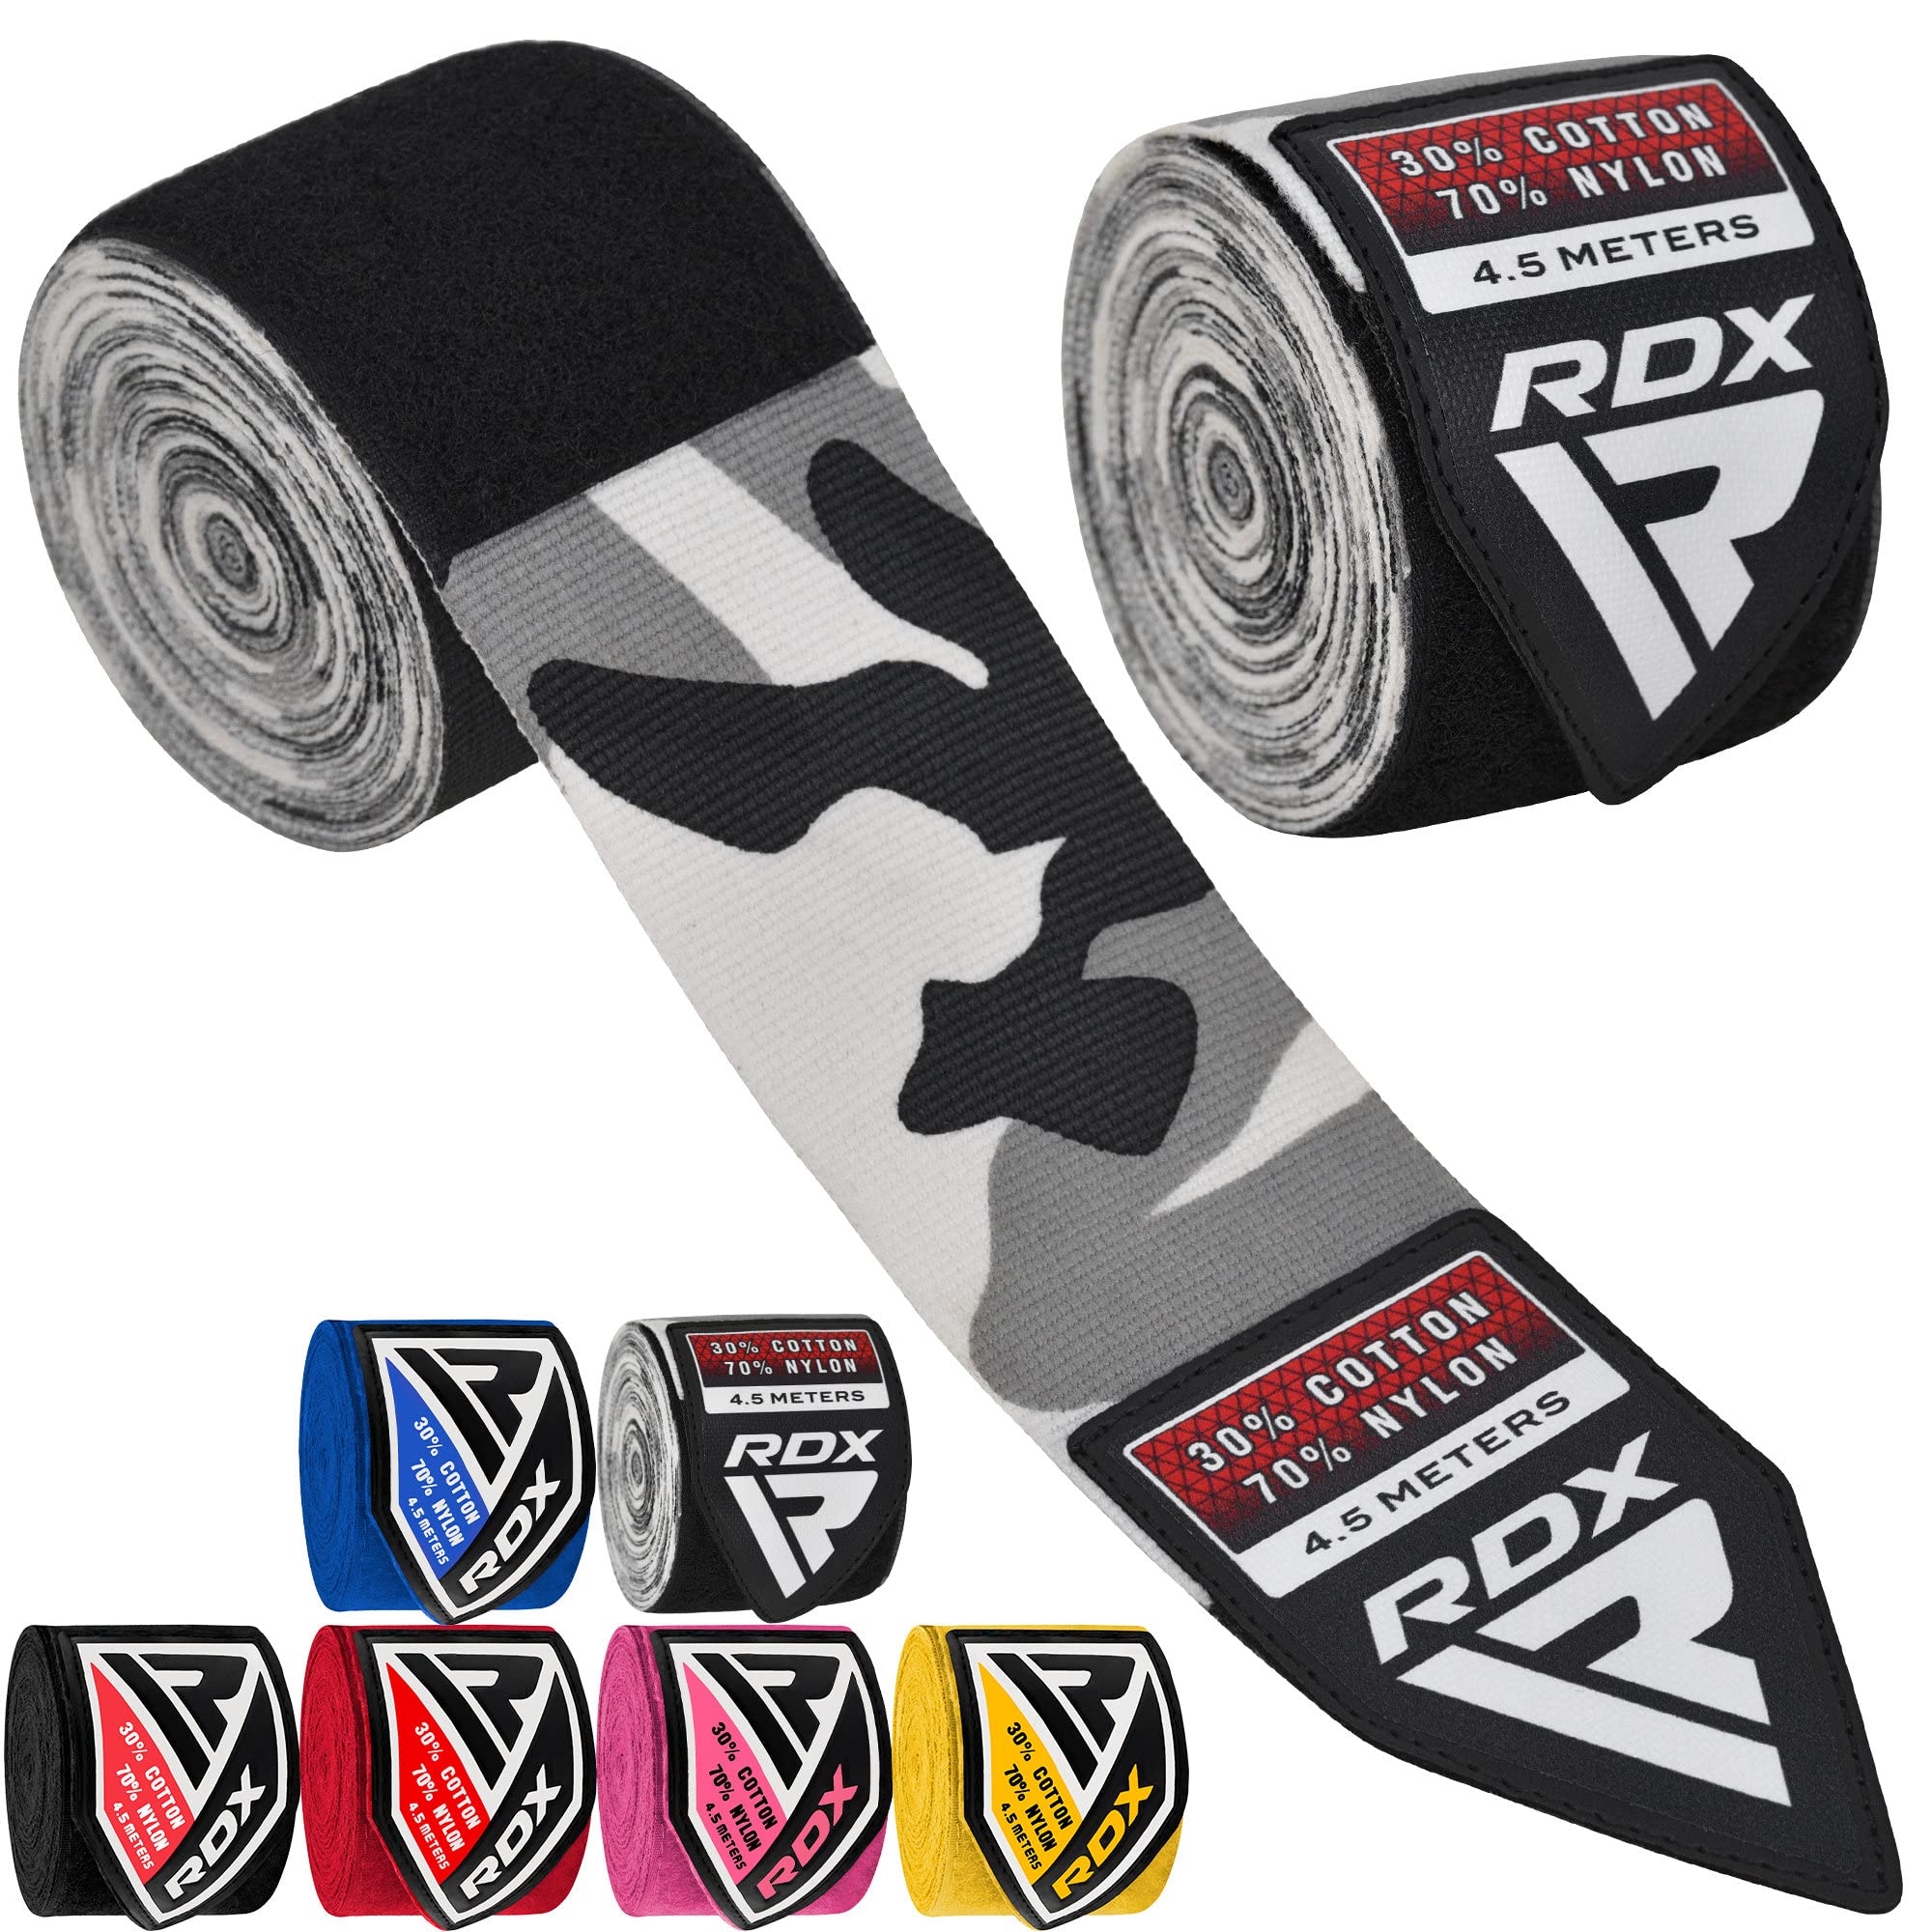 Boxing Hand Wraps by RDX, Inner Gloves, Bandages MMA, Boxing Wraps